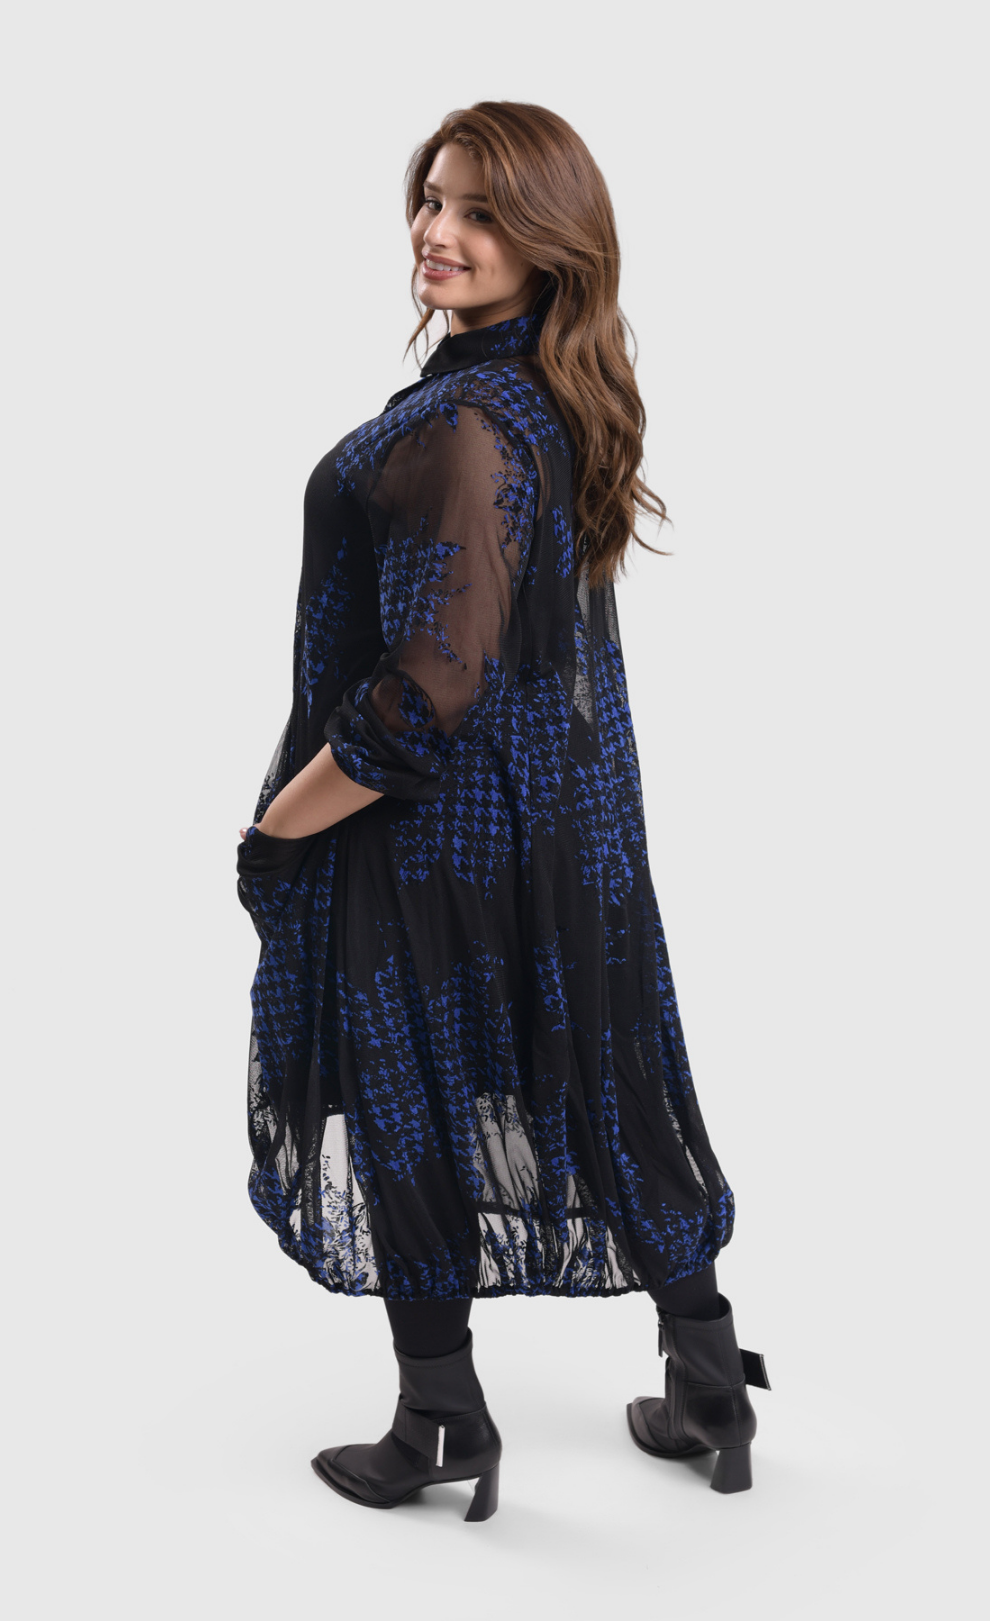 Left side/back full body view of a woman wearing the alembika floral check wonderful dress. This long sleeved dress is black mesh/sheer with blue and black houndstooth/floral printed pieces of fabric all over it.